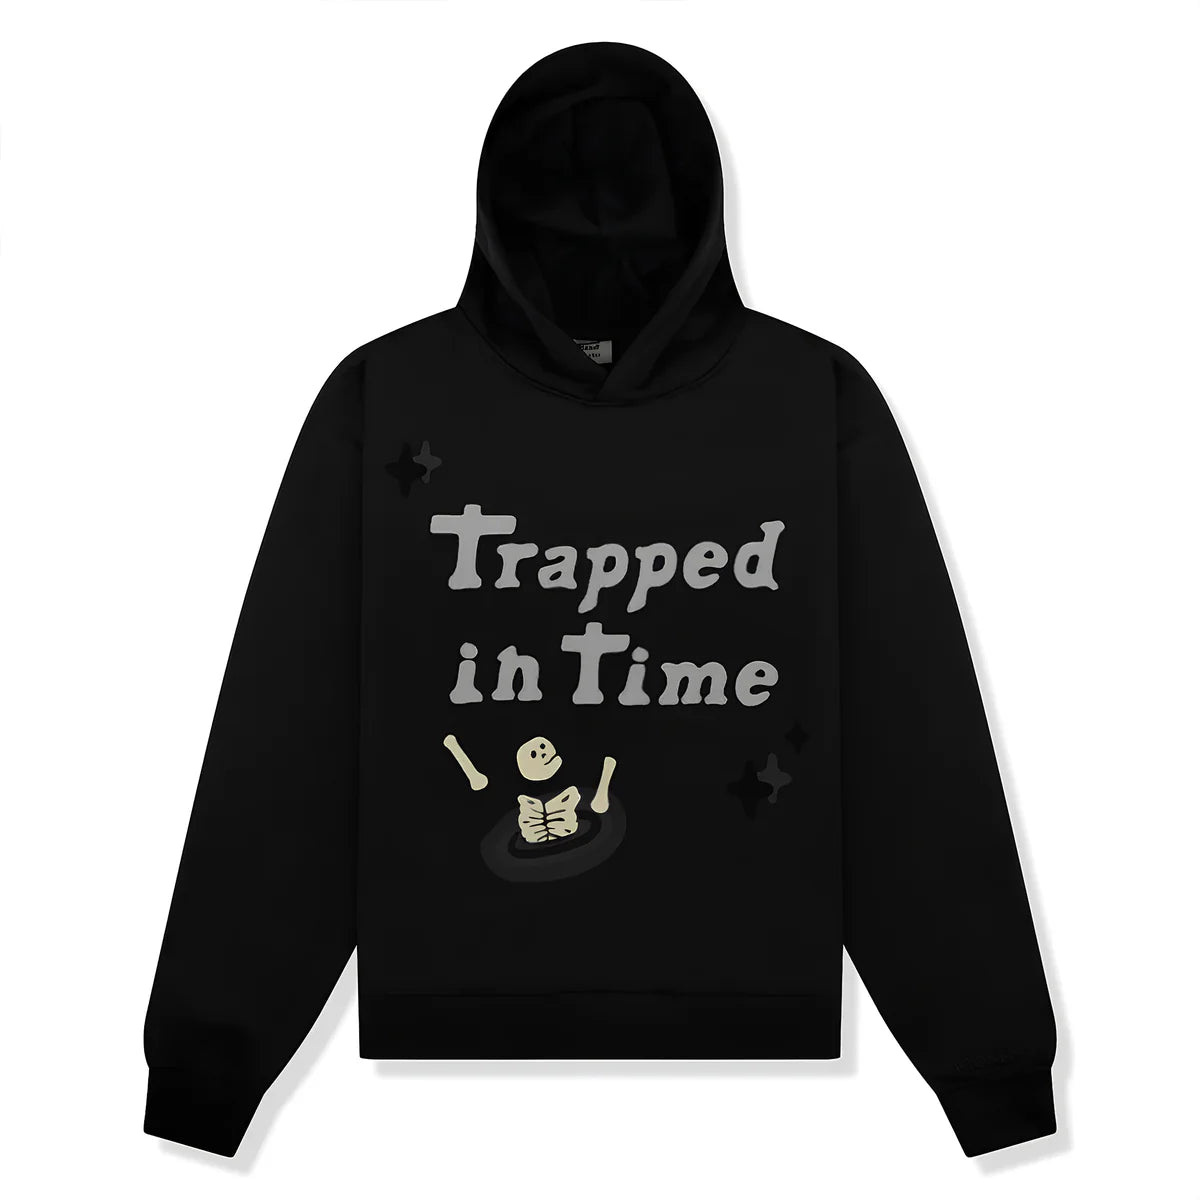 BROKEN PLANET HOODIE - TRAPPED IN TIME